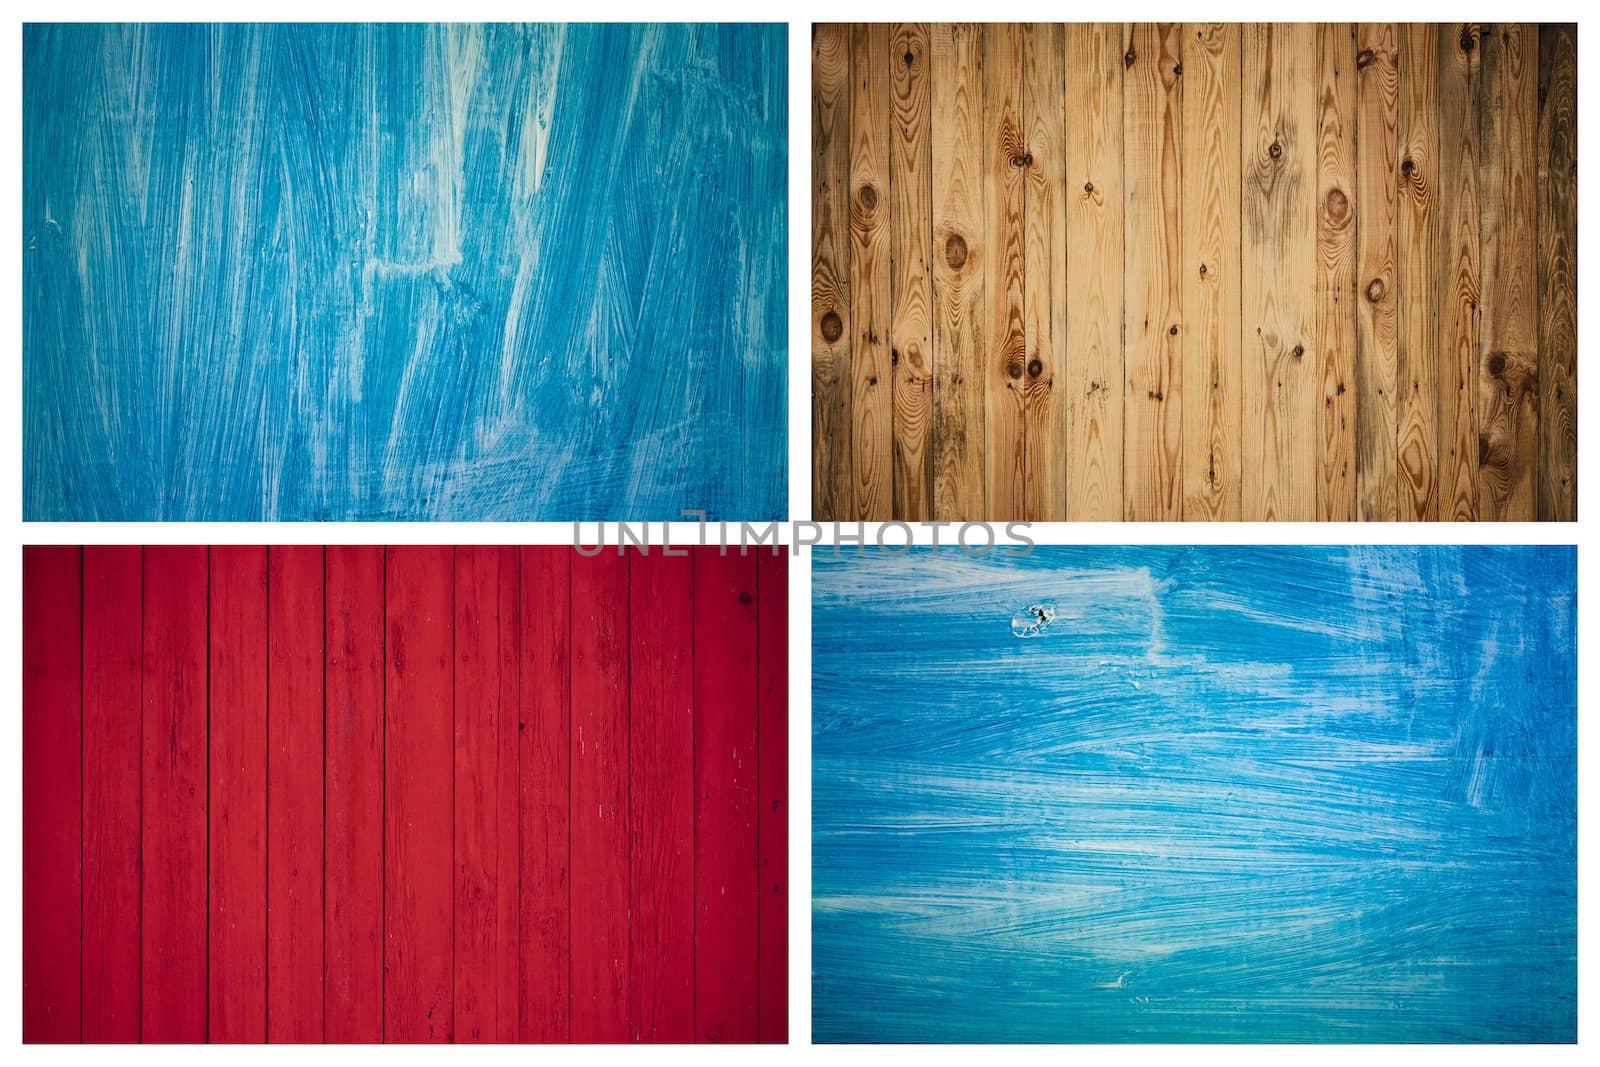 The Grunge Wood Texture With Natural Patterns. Surface Of Old Wood Paint Over. Set, Collage